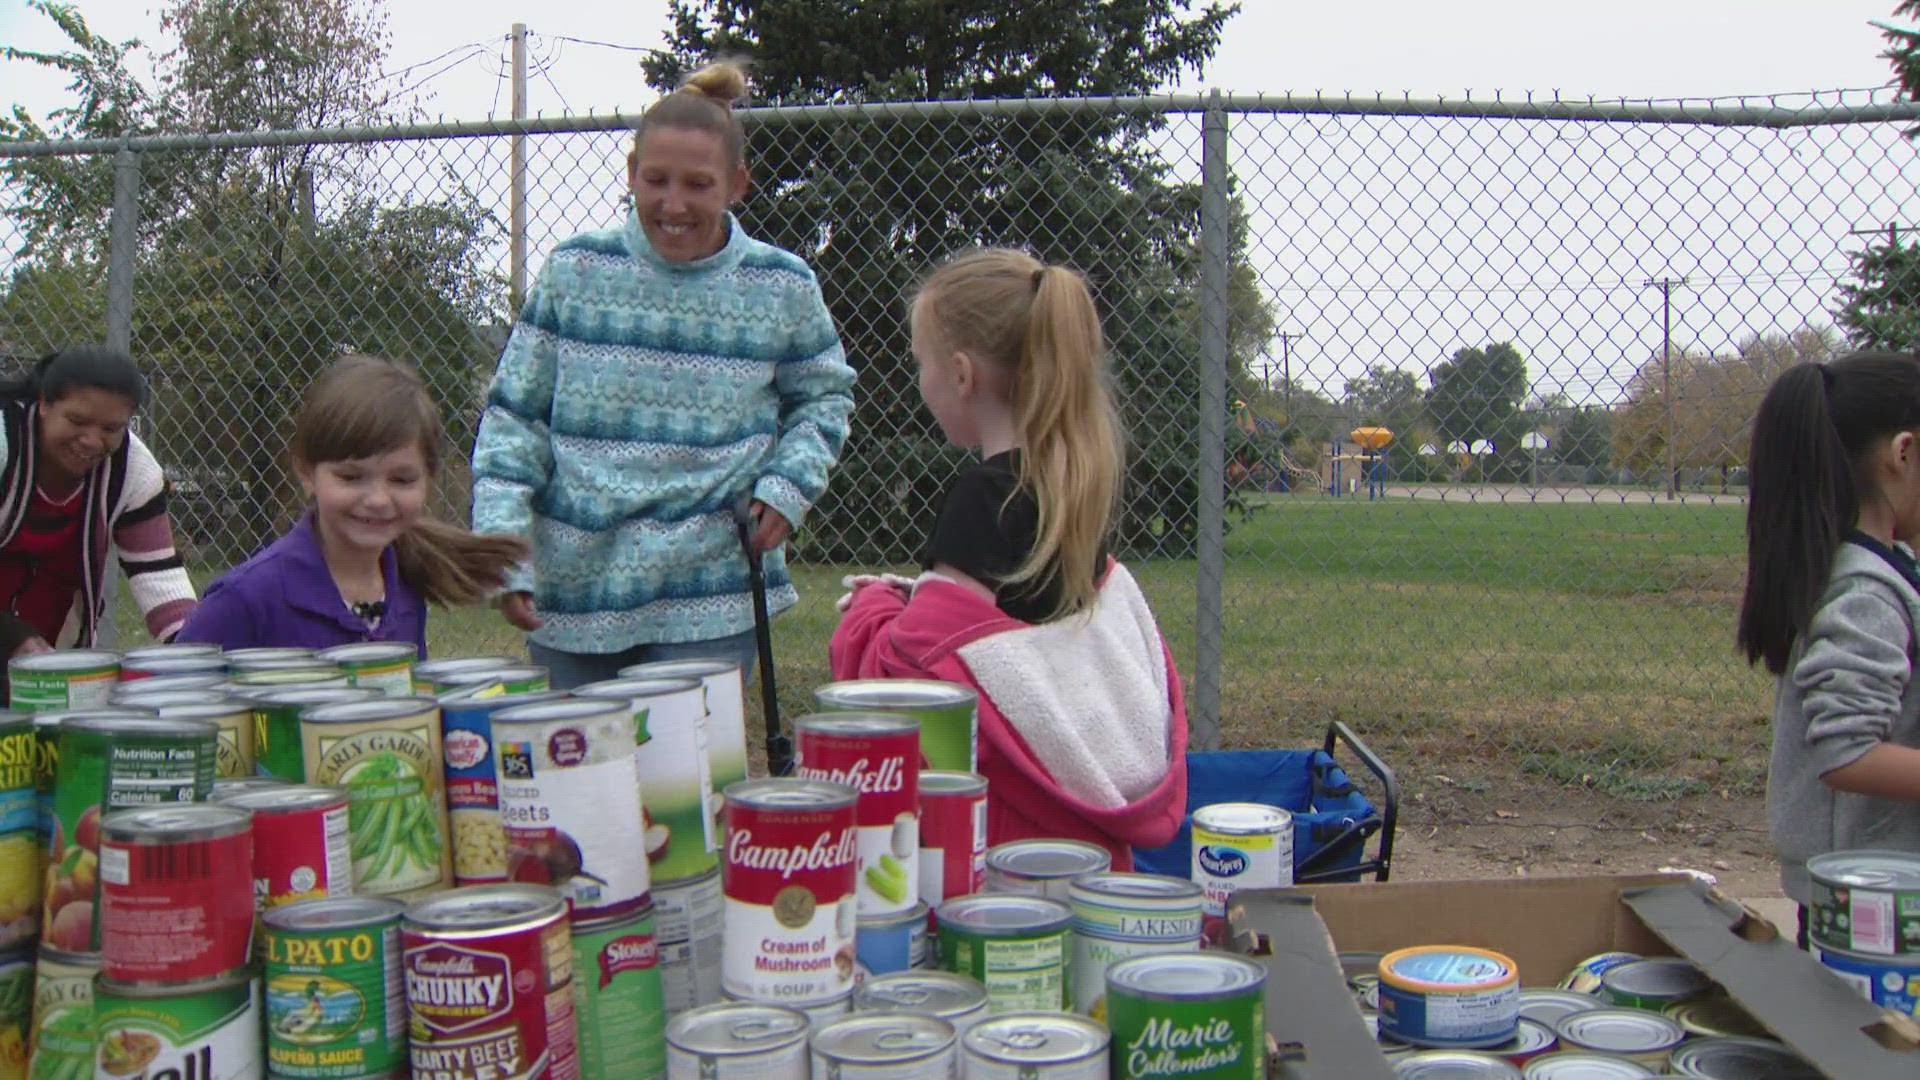 Second graders at Billie Martinez Elementary in Greeley started a "food distribution day" after they saw there was hunger in their community.